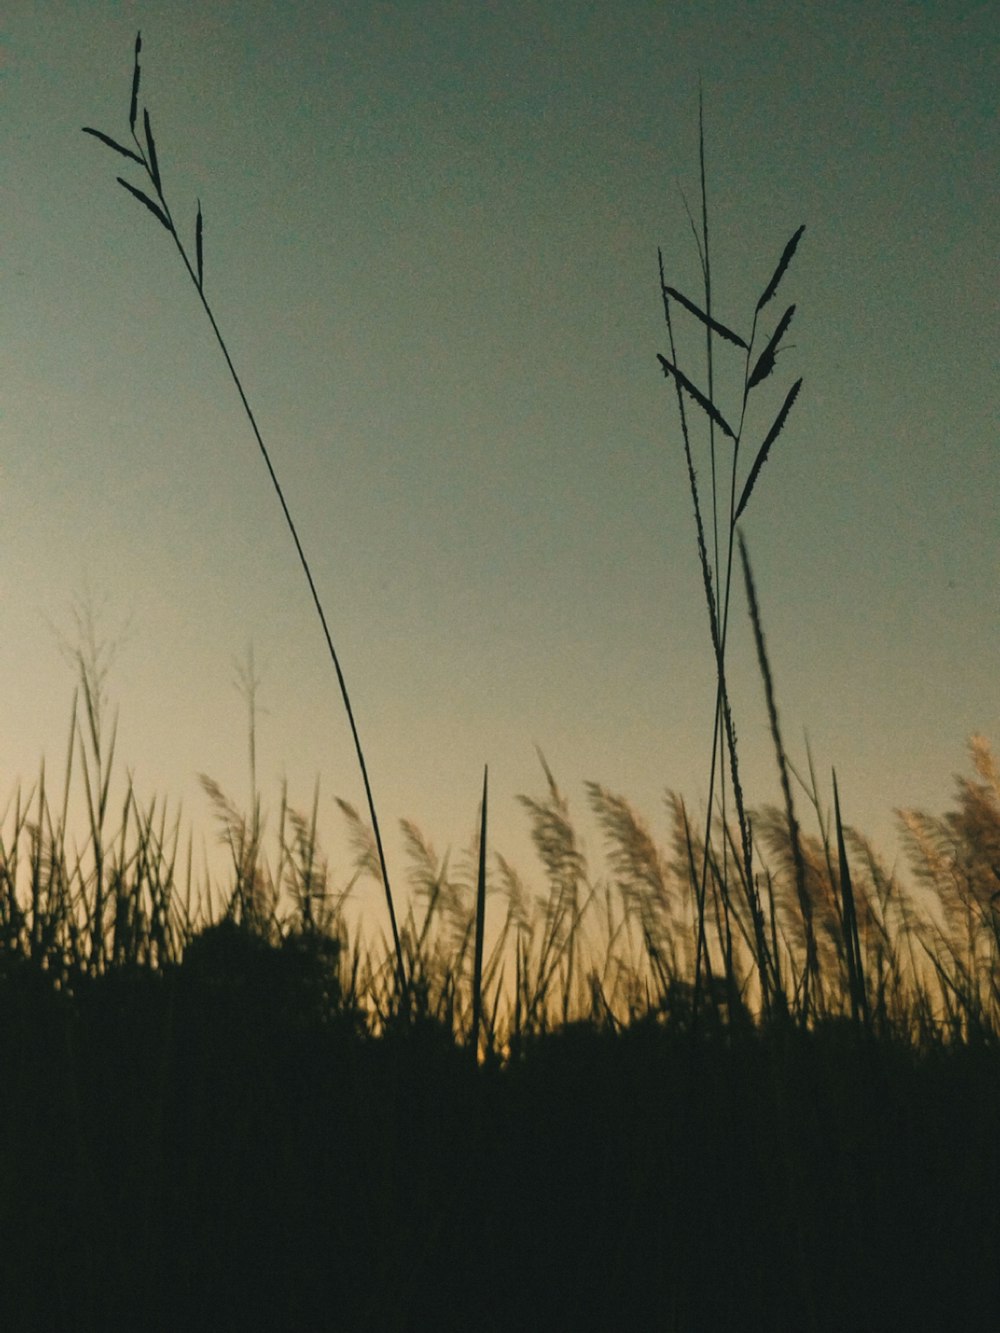 the silhouette of tall grass against a blue sky